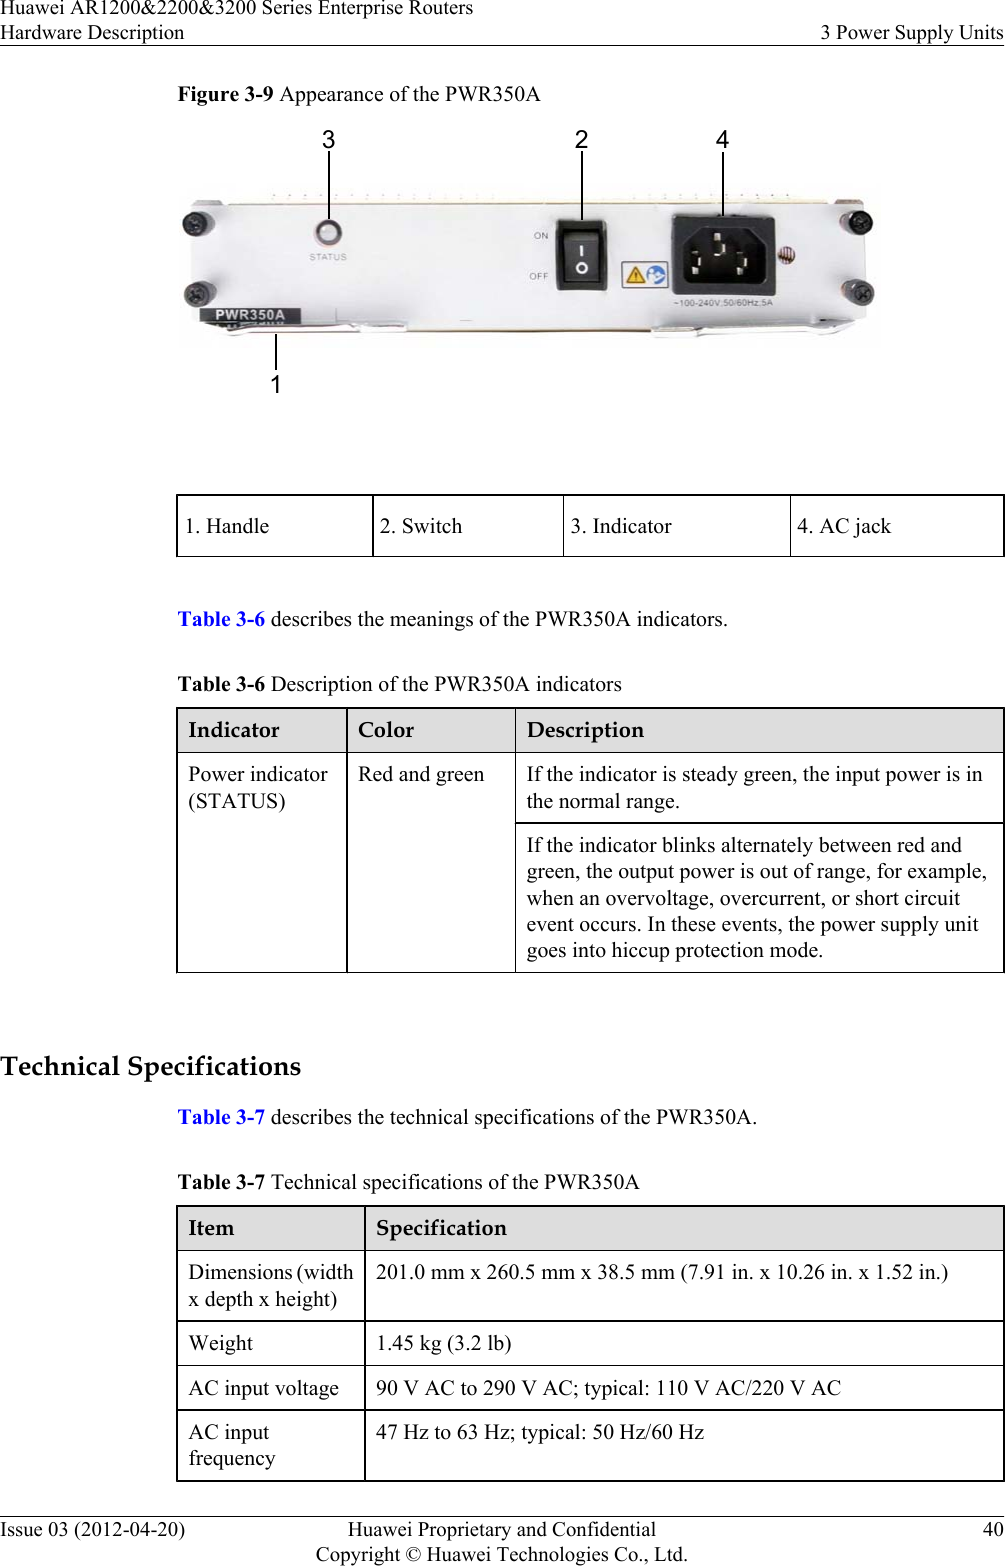 Figure 3-9 Appearance of the PWR350A312 4 1. Handle 2. Switch 3. Indicator 4. AC jackTable 3-6 describes the meanings of the PWR350A indicators.Table 3-6 Description of the PWR350A indicatorsIndicator Color DescriptionPower indicator(STATUS)Red and green If the indicator is steady green, the input power is inthe normal range.If the indicator blinks alternately between red andgreen, the output power is out of range, for example,when an overvoltage, overcurrent, or short circuitevent occurs. In these events, the power supply unitgoes into hiccup protection mode. Technical SpecificationsTable 3-7 describes the technical specifications of the PWR350A.Table 3-7 Technical specifications of the PWR350AItem SpecificationDimensions (widthx depth x height)201.0 mm x 260.5 mm x 38.5 mm (7.91 in. x 10.26 in. x 1.52 in.)Weight 1.45 kg (3.2 lb)AC input voltage 90 V AC to 290 V AC; typical: 110 V AC/220 V ACAC inputfrequency47 Hz to 63 Hz; typical: 50 Hz/60 HzHuawei AR1200&amp;2200&amp;3200 Series Enterprise RoutersHardware Description 3 Power Supply UnitsIssue 03 (2012-04-20) Huawei Proprietary and ConfidentialCopyright © Huawei Technologies Co., Ltd.40